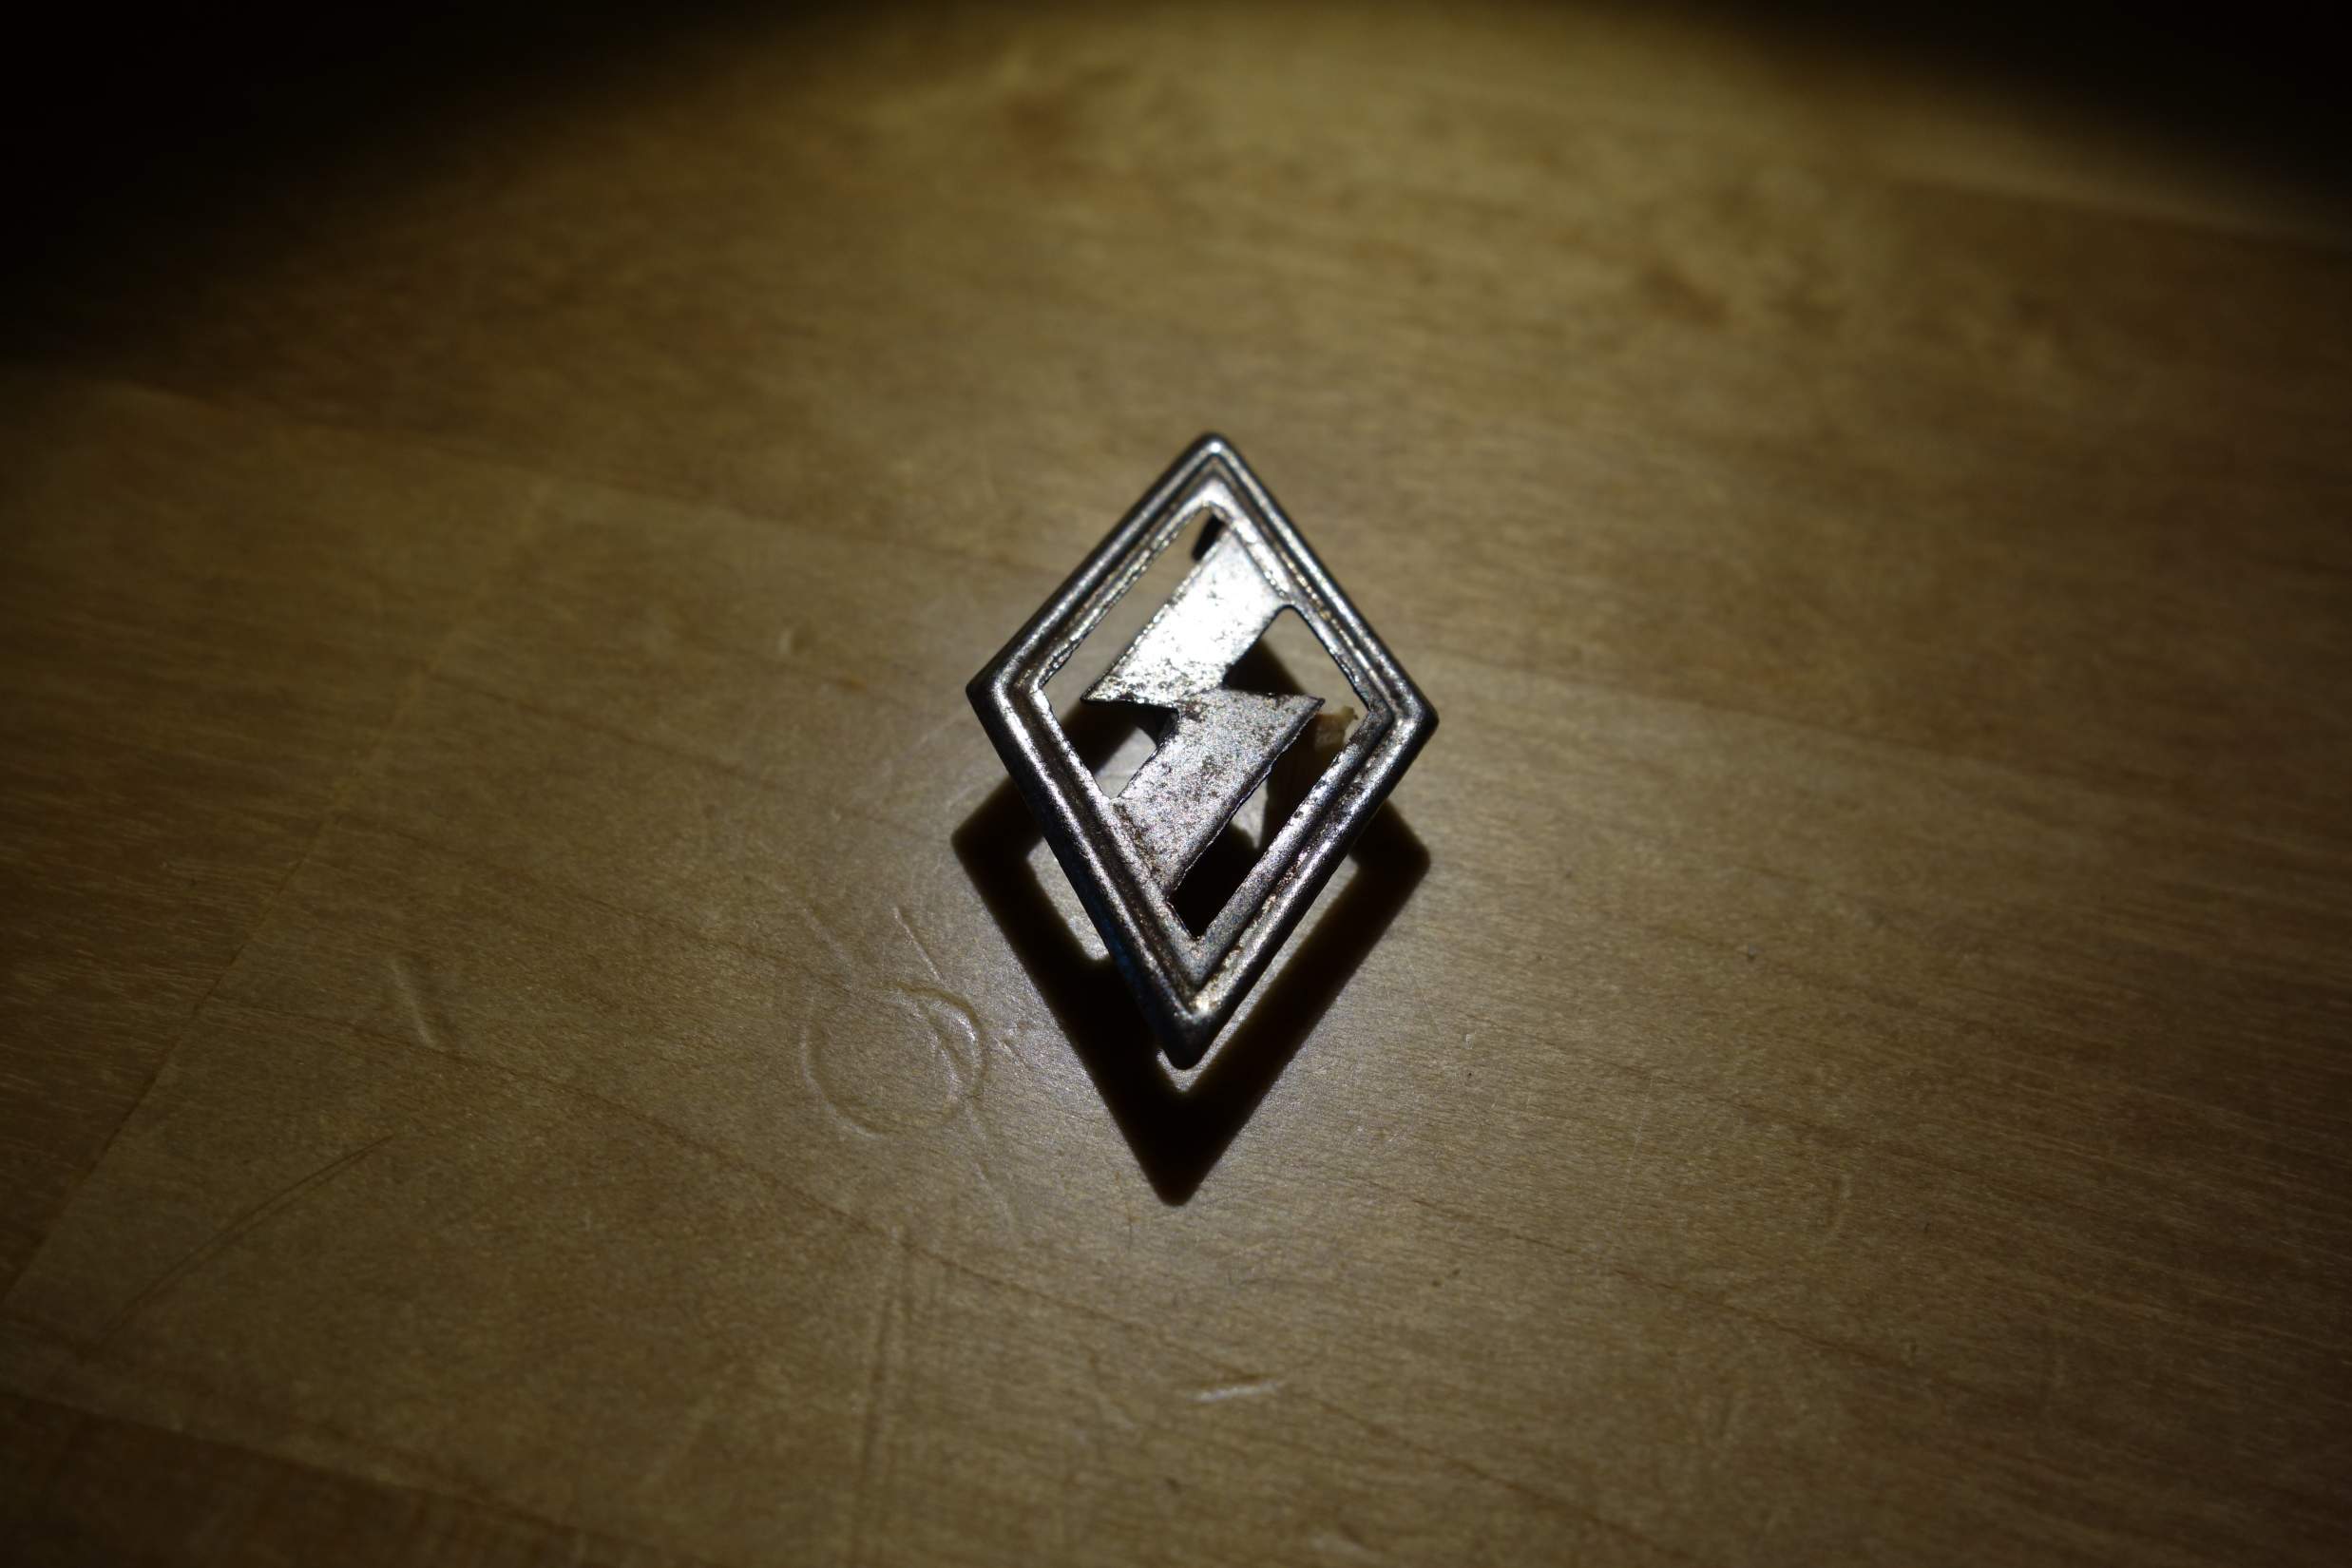 Silver with Diamond Shape Logo - Unknown small diamond shape logo with safety pin?